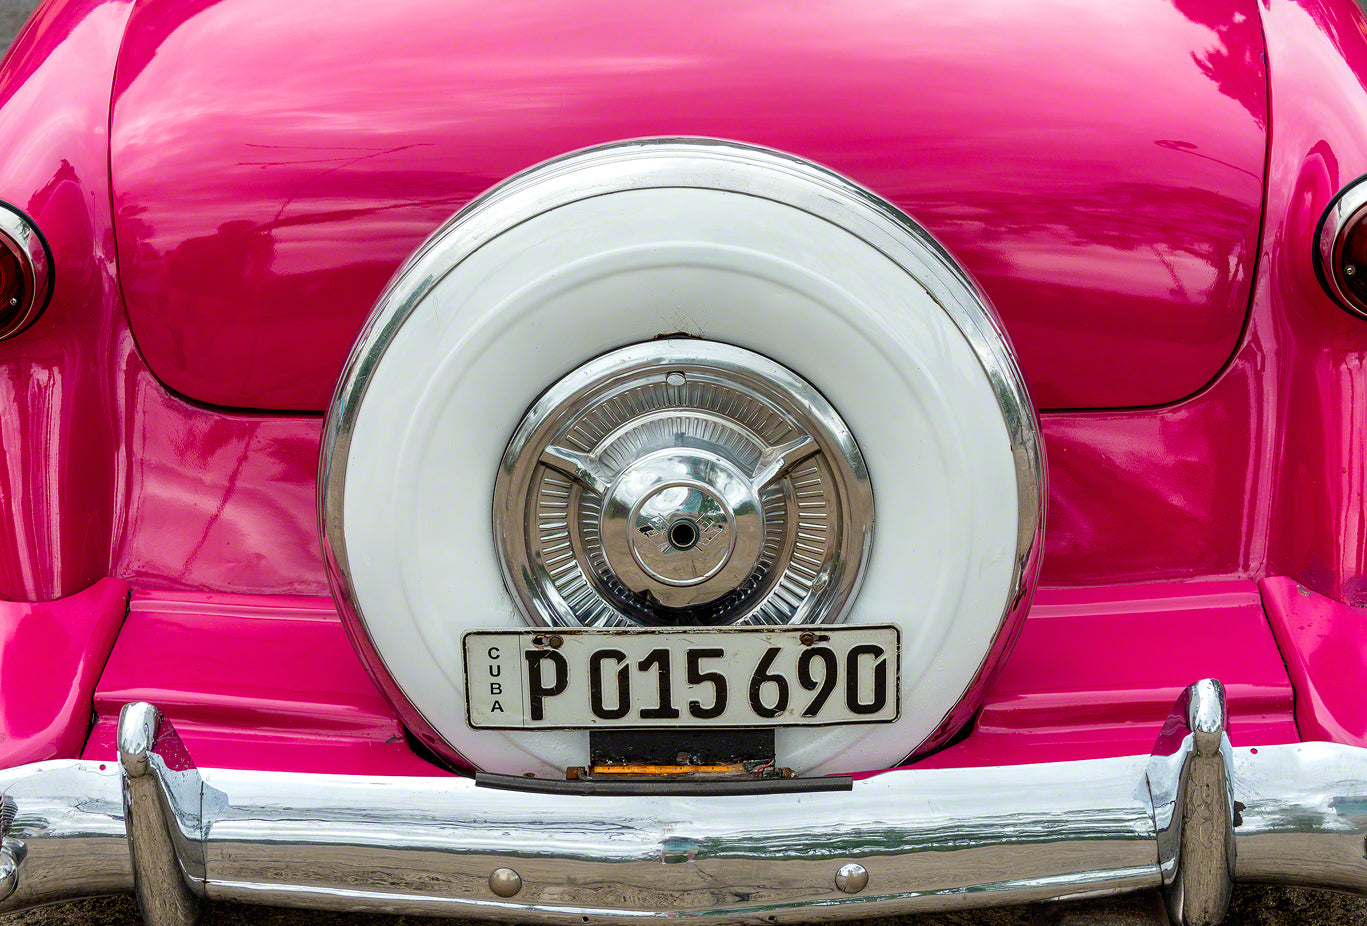 A pink classic American car used as a taxi in Havana Cuba